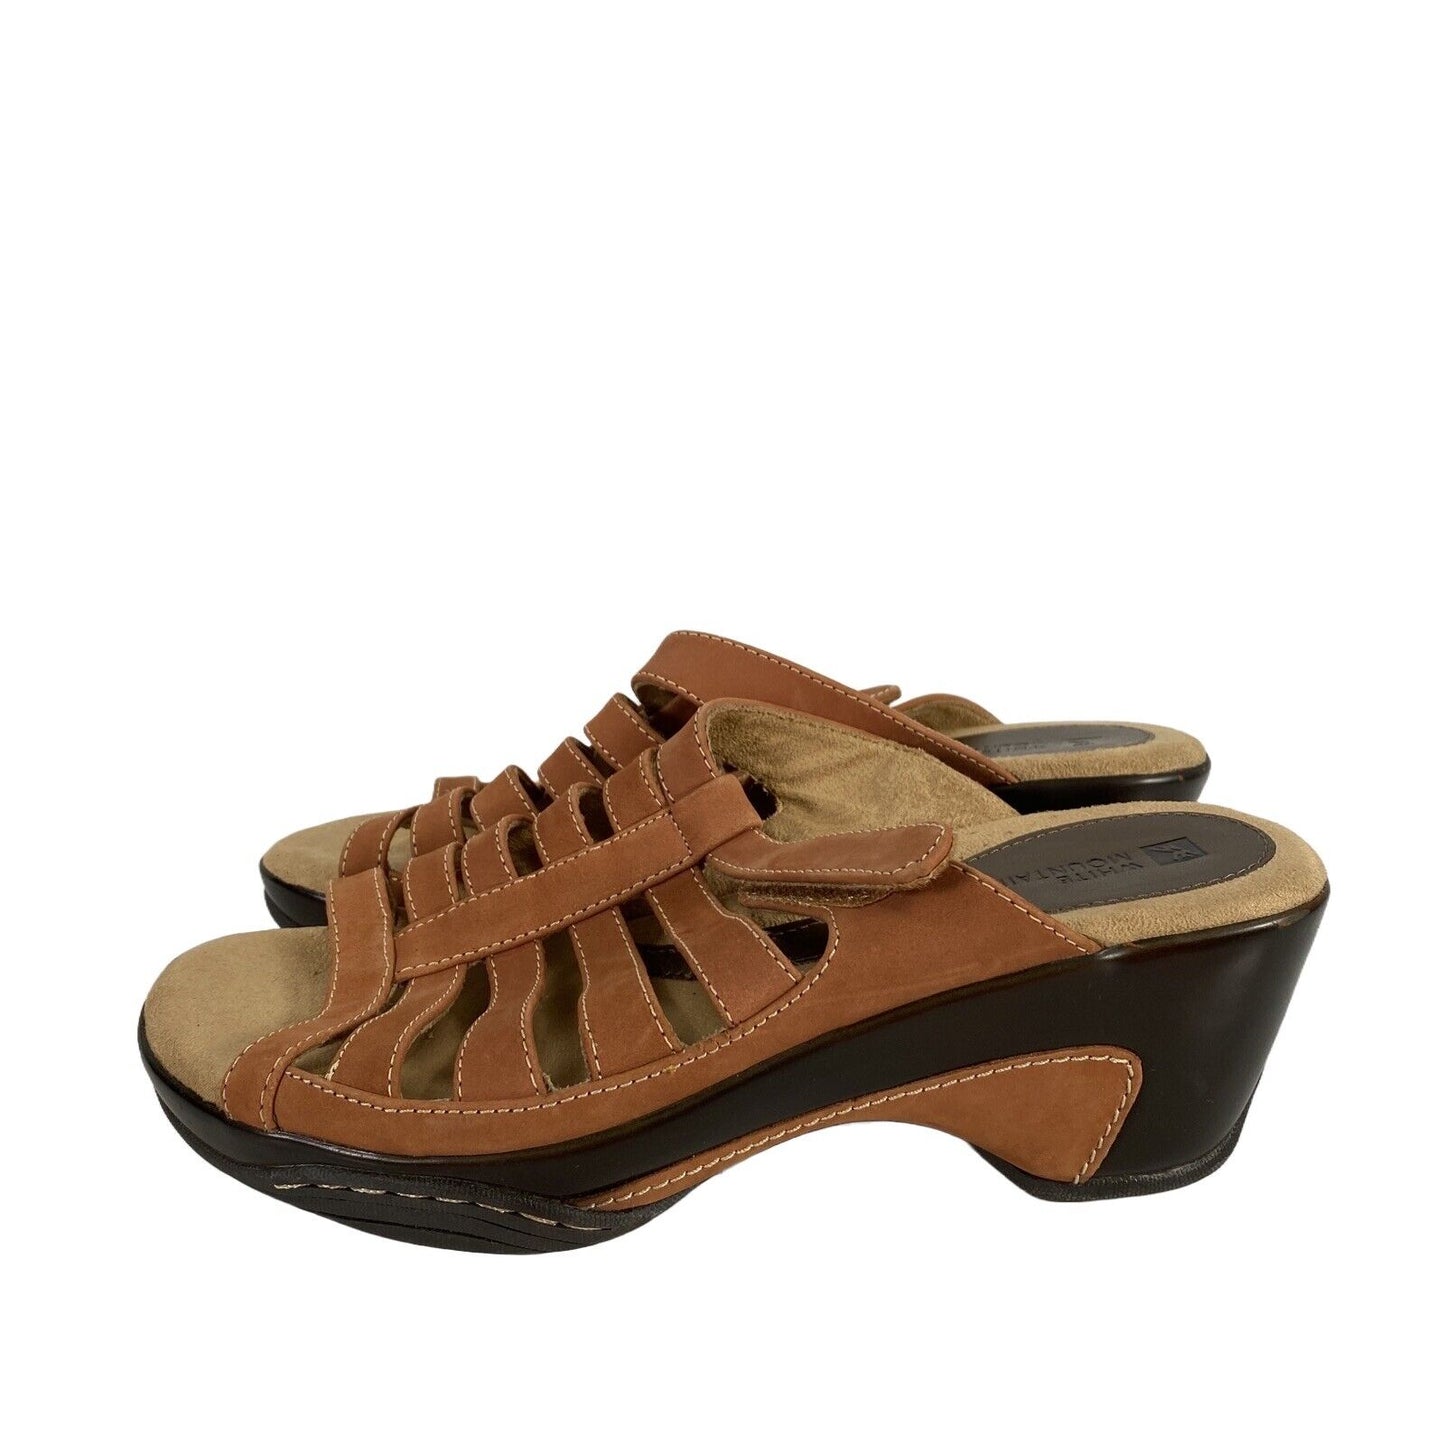 White Mountain Women's Brown Fabric Strappy Wedge Sandals - 9.5 M